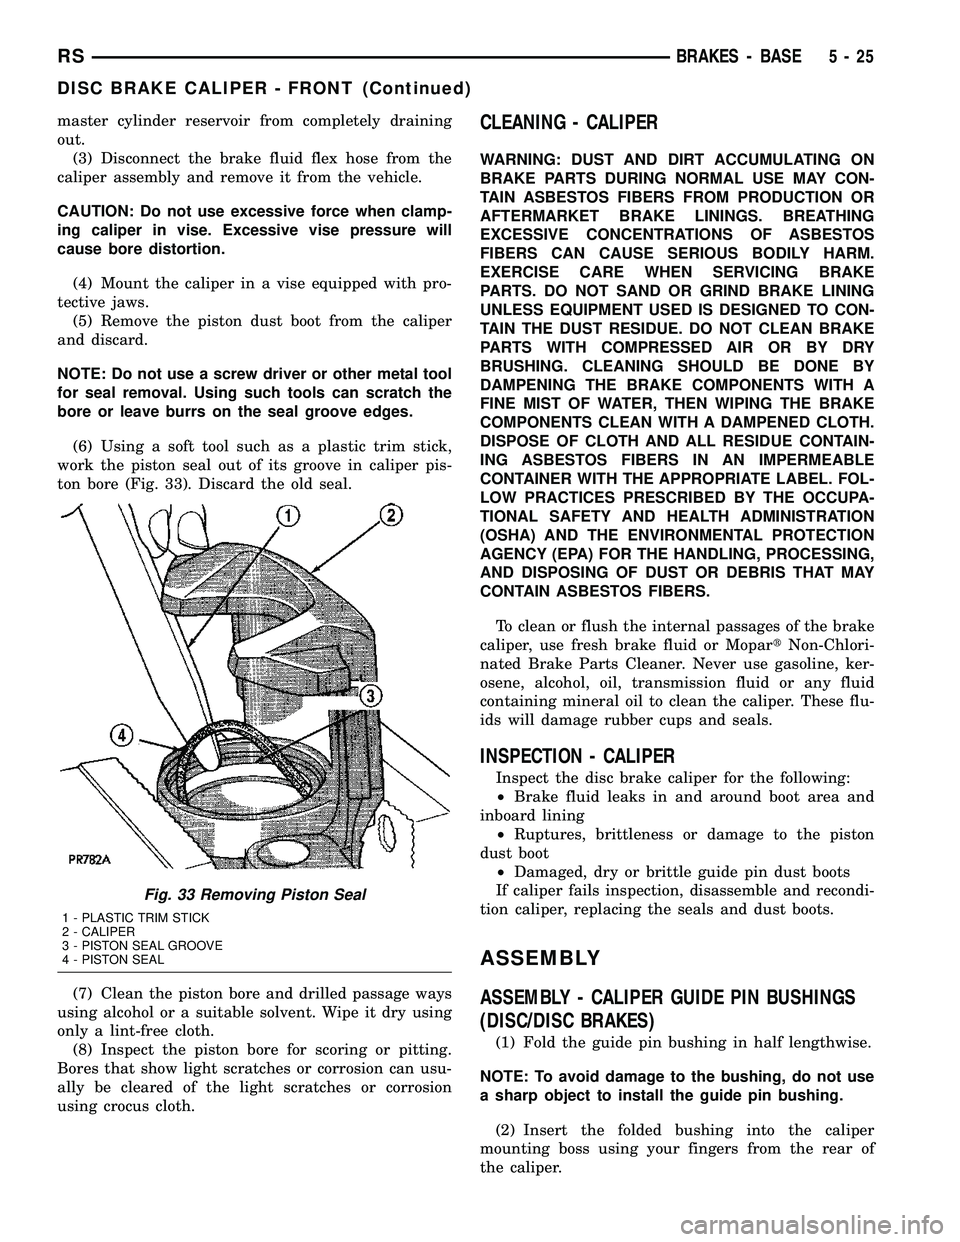 DODGE TOWN AND COUNTRY 2004  Service Manual master cylinder reservoir from completely draining
out.
(3) Disconnect the brake fluid flex hose from the
caliper assembly and remove it from the vehicle.
CAUTION: Do not use excessive force when clam